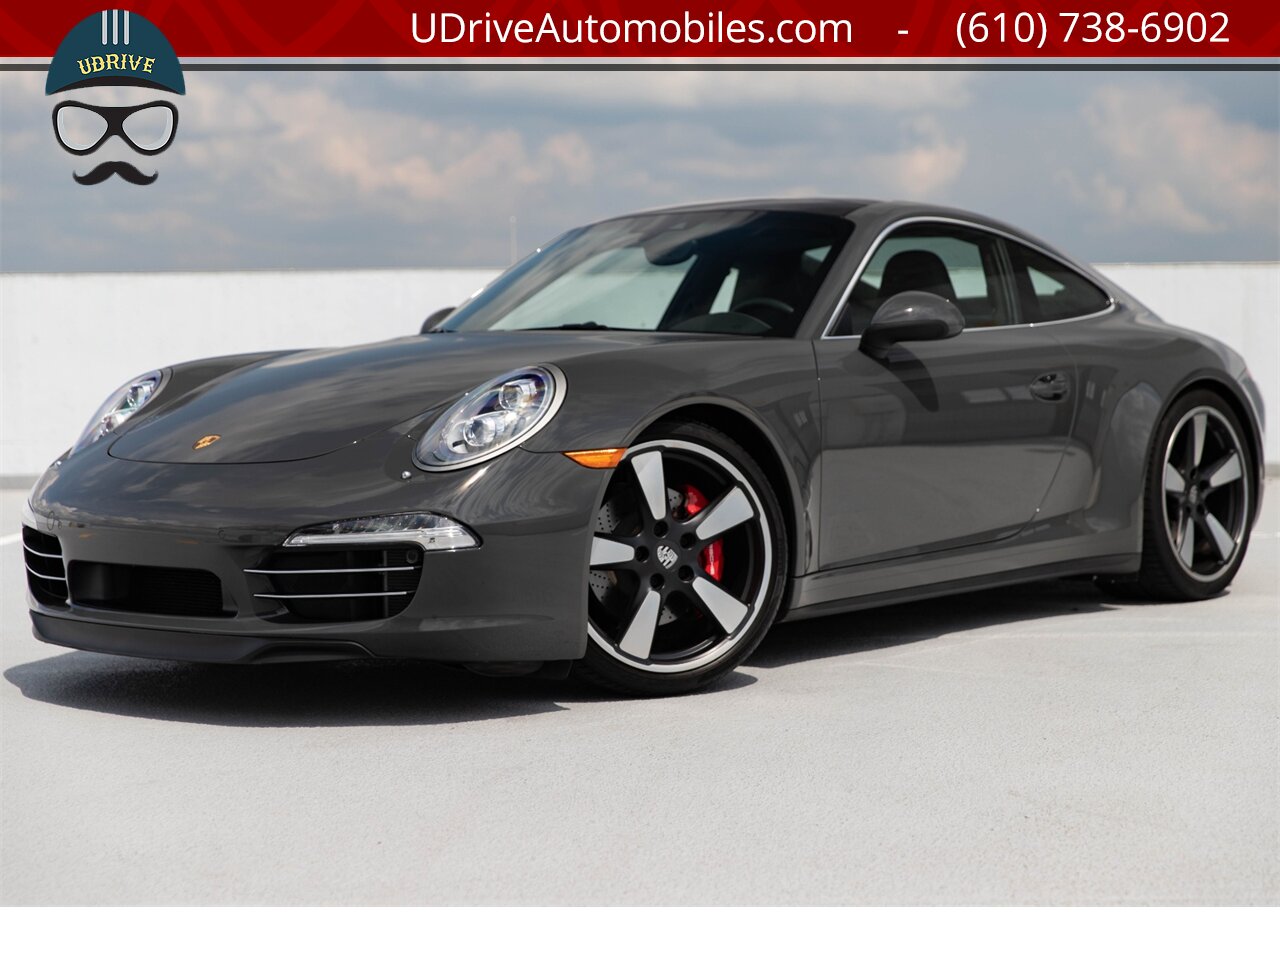 2014 Porsche 911 Carrera S 50th Anniversary Edition Certified  CPO Warranty thru 12/26/21 Full Front End Clear Film - Photo 1 - West Chester, PA 19382